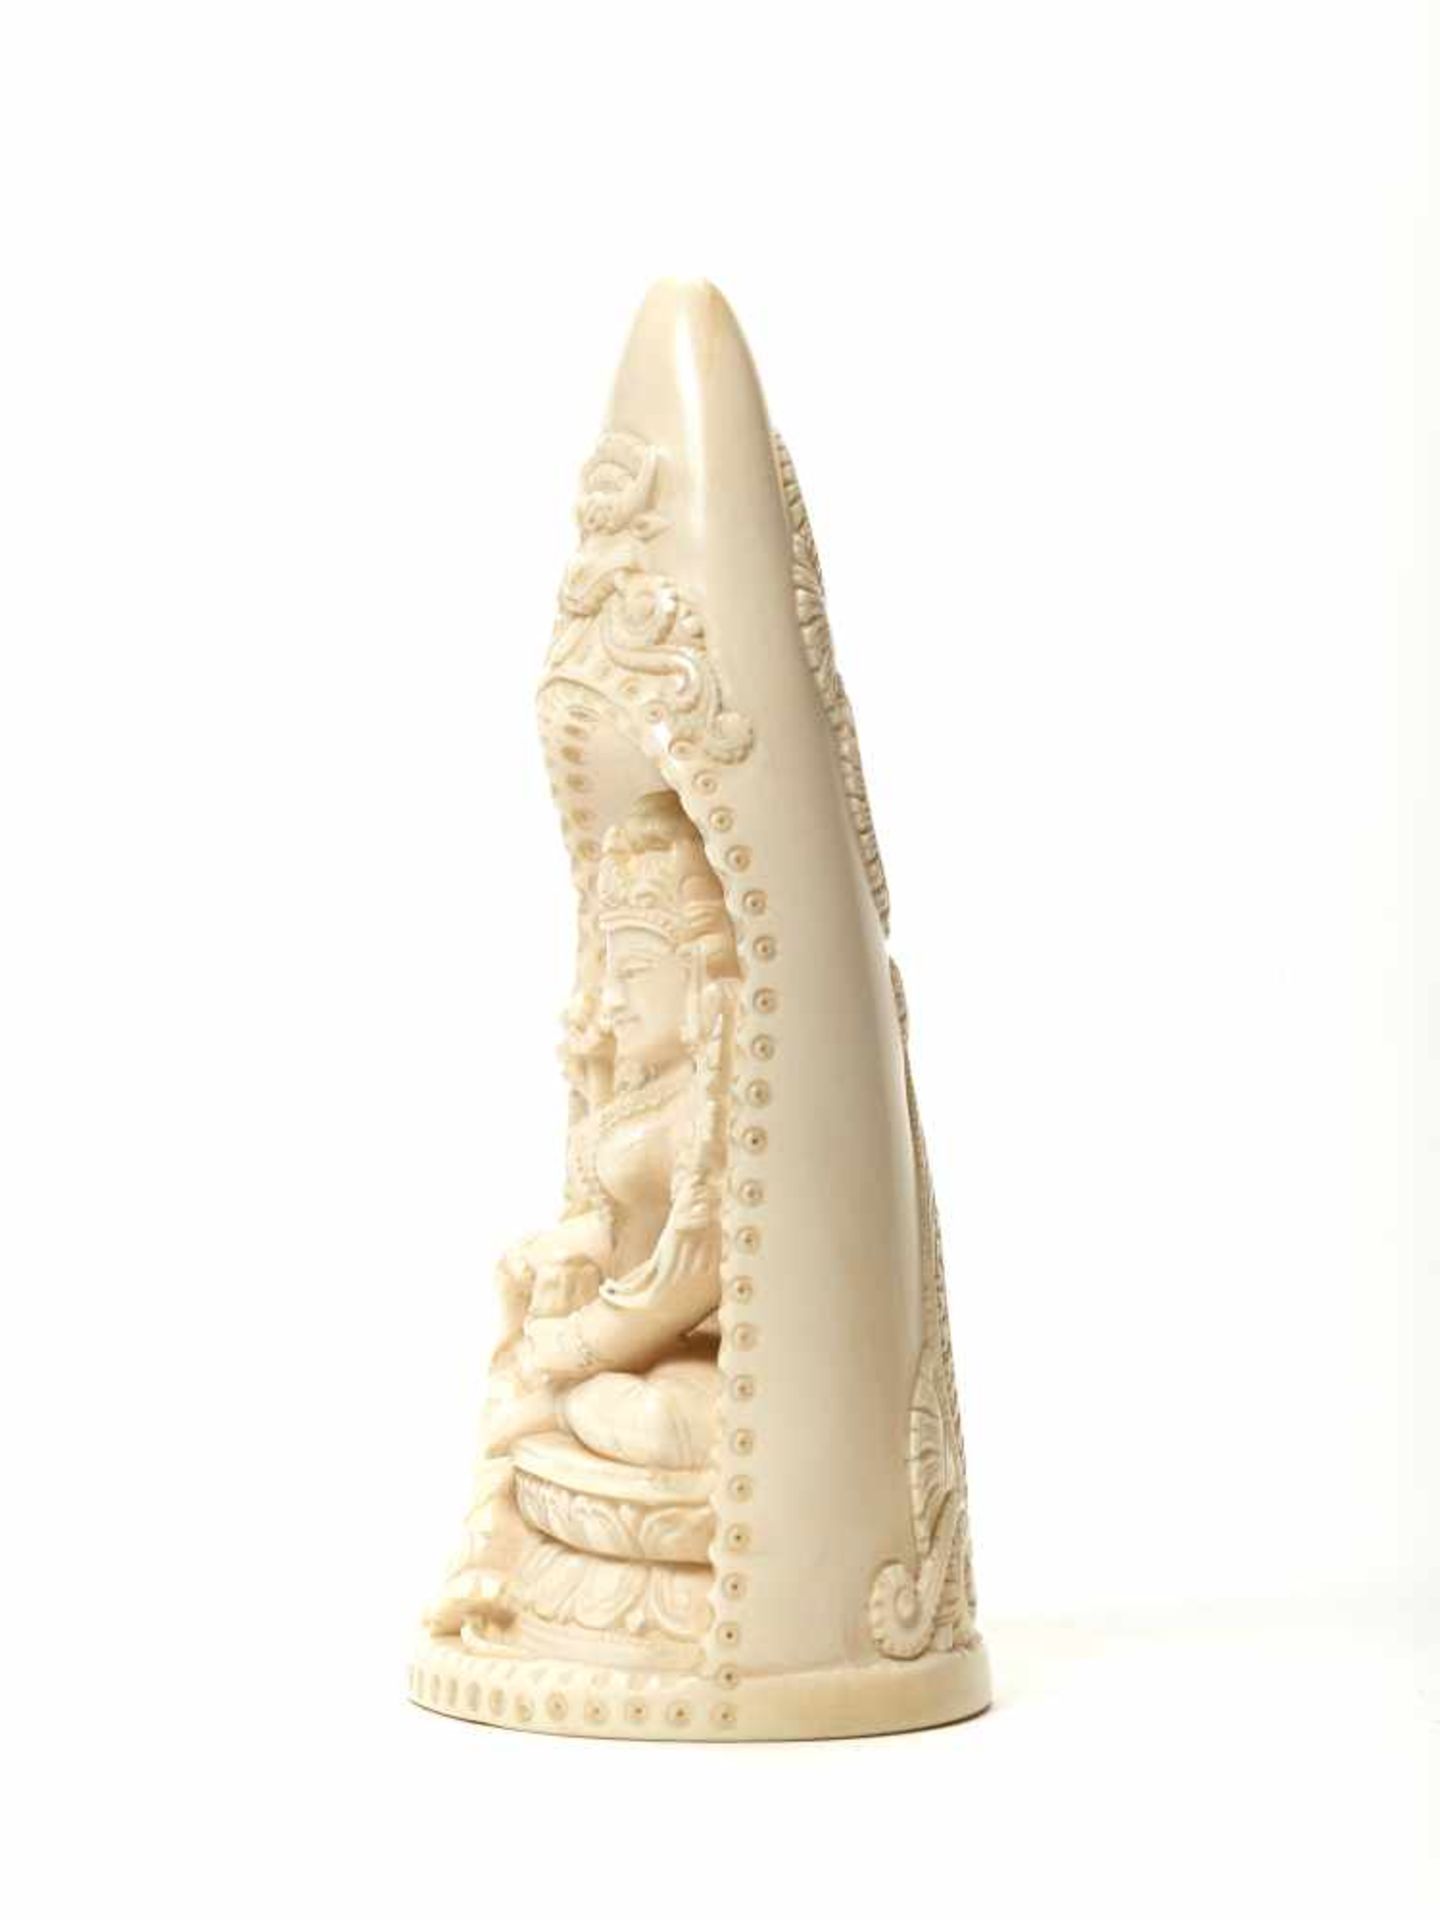 AN INDIAN IVORY TUSK CARVING OF PADMAPANI, 20th CENTURYIvoryIndia, 20th centuryThe ivory carved from - Image 3 of 5